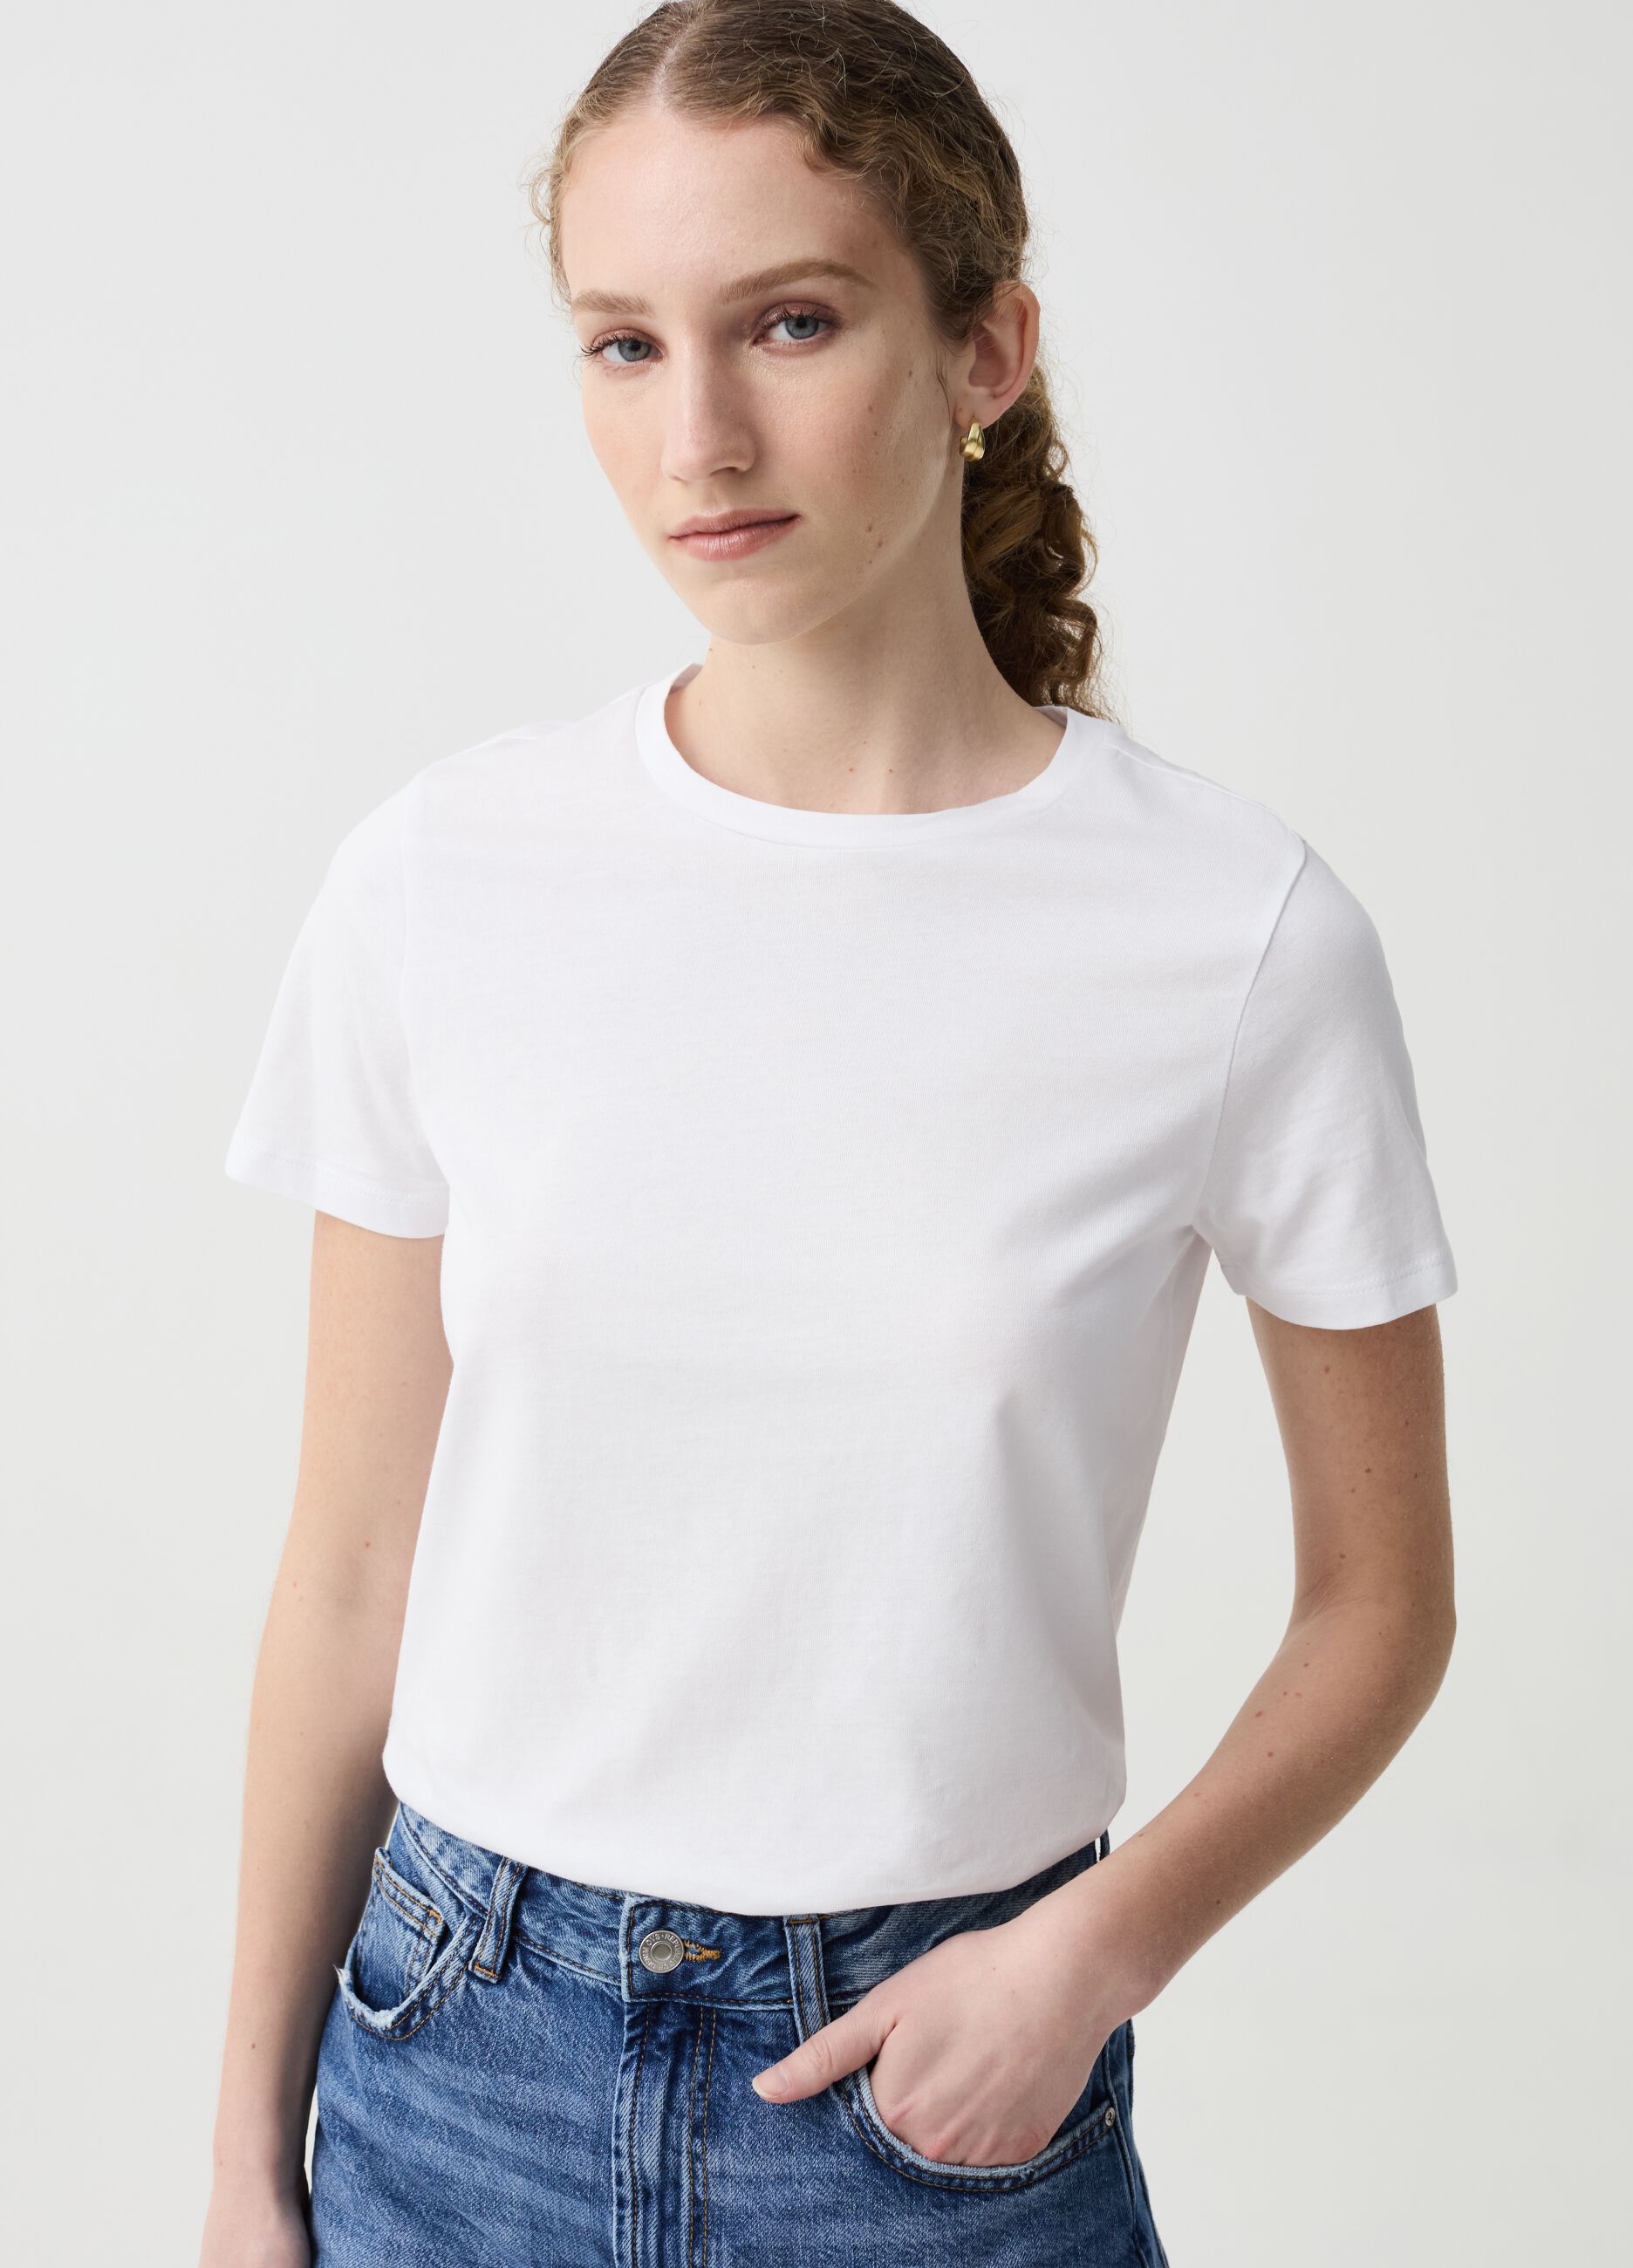 Essential T-shirt in cotton